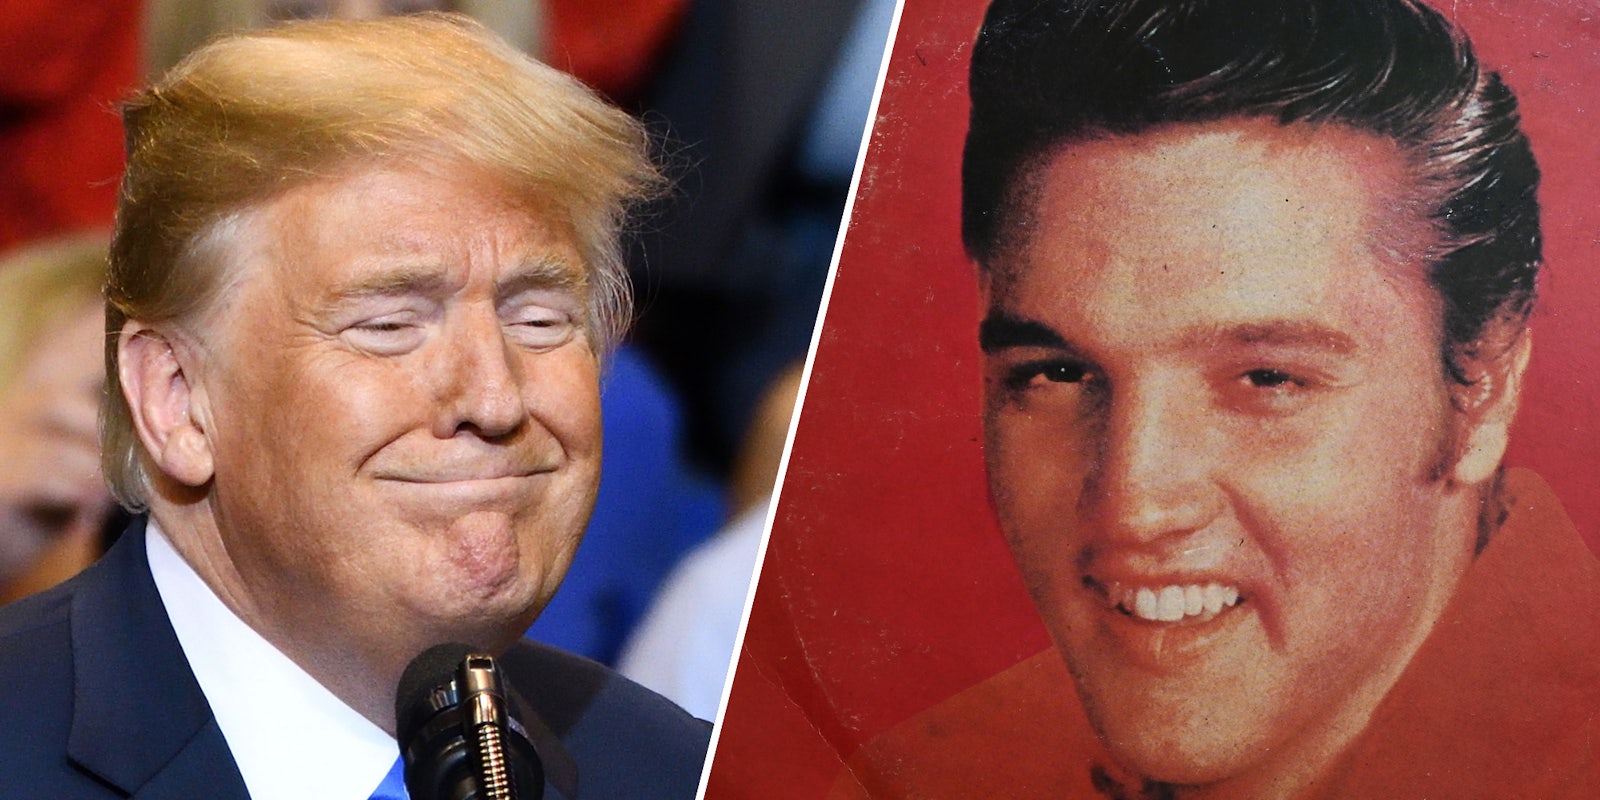 Donald Trump ridiculed after saying everyone thinks he looks like Elvis